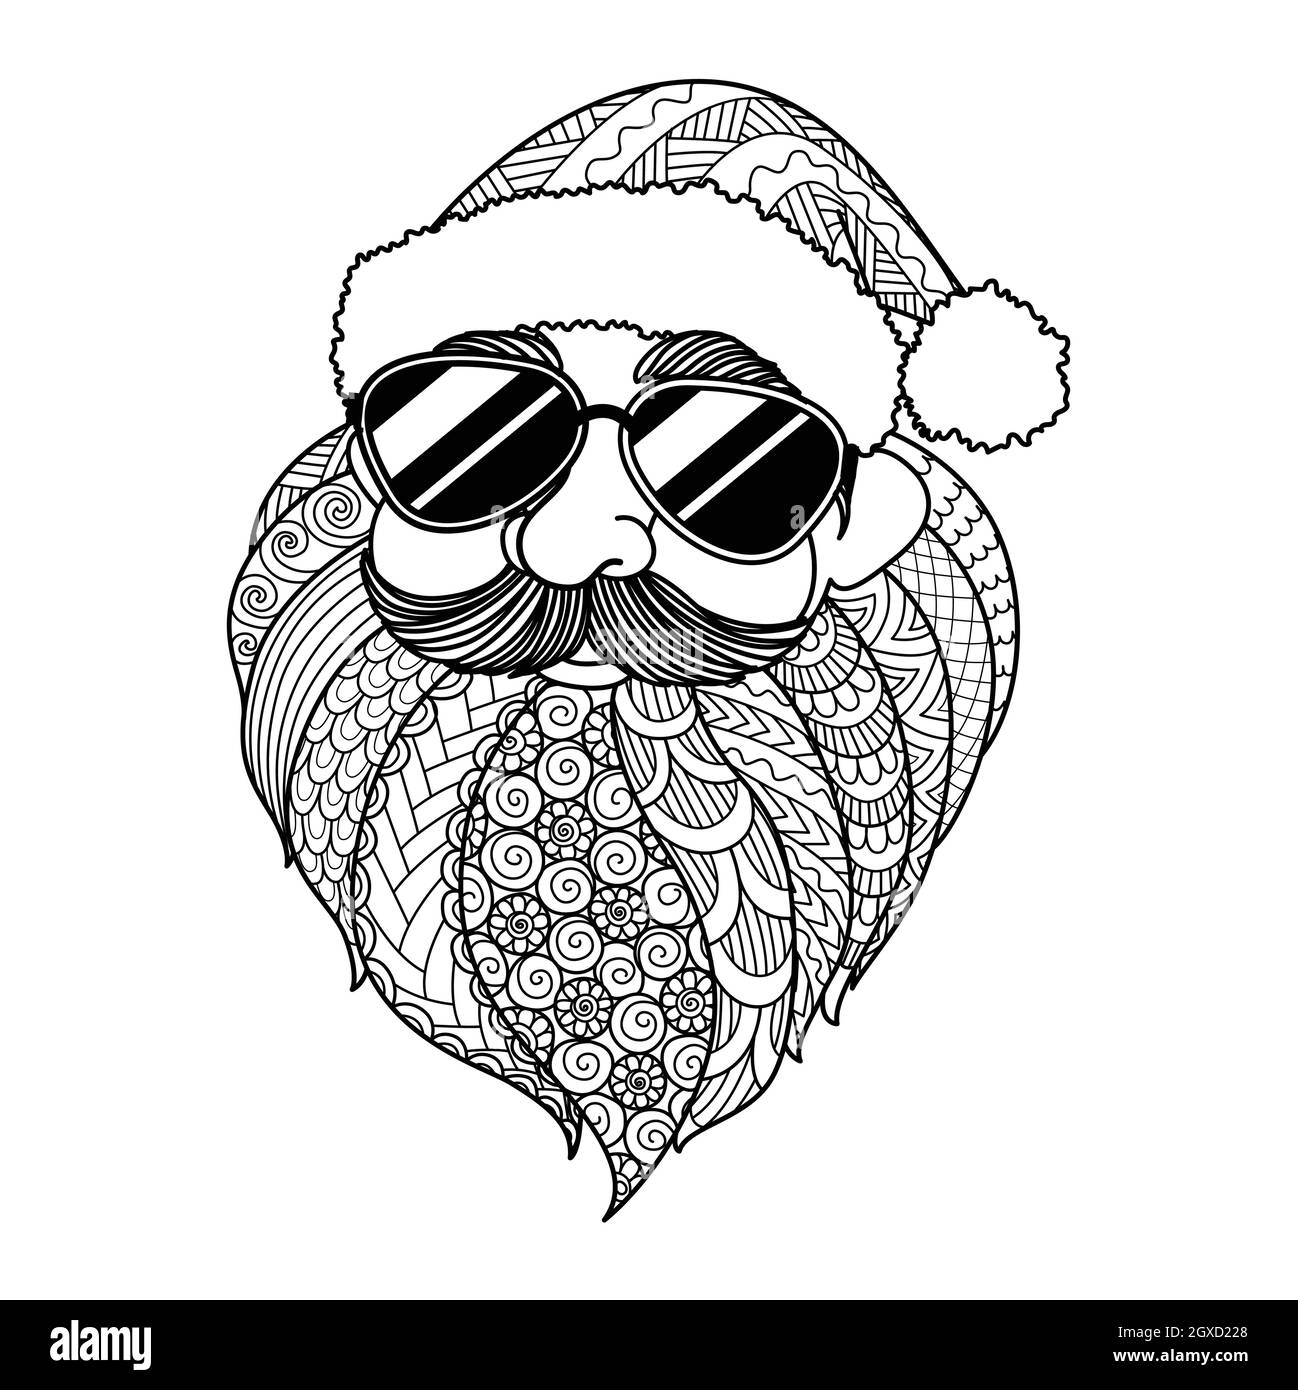 Santa claus wearing sunglass, Christmas in July concept. Vector illustration for coloring page, engraving, laser cut or print on product. Stock Vector